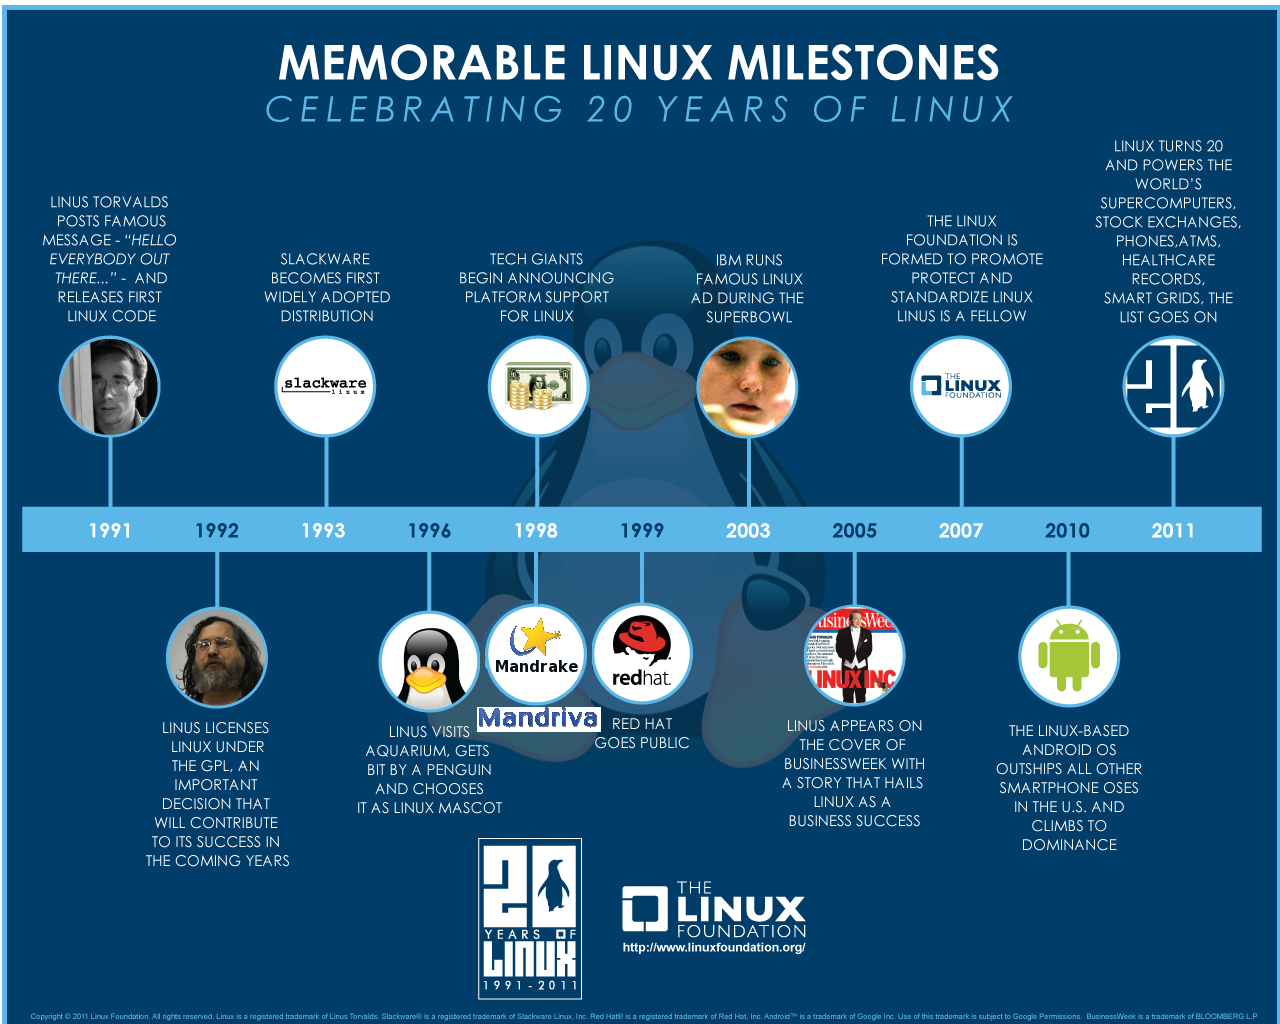 http://www.linuxfoundation.org/20th/